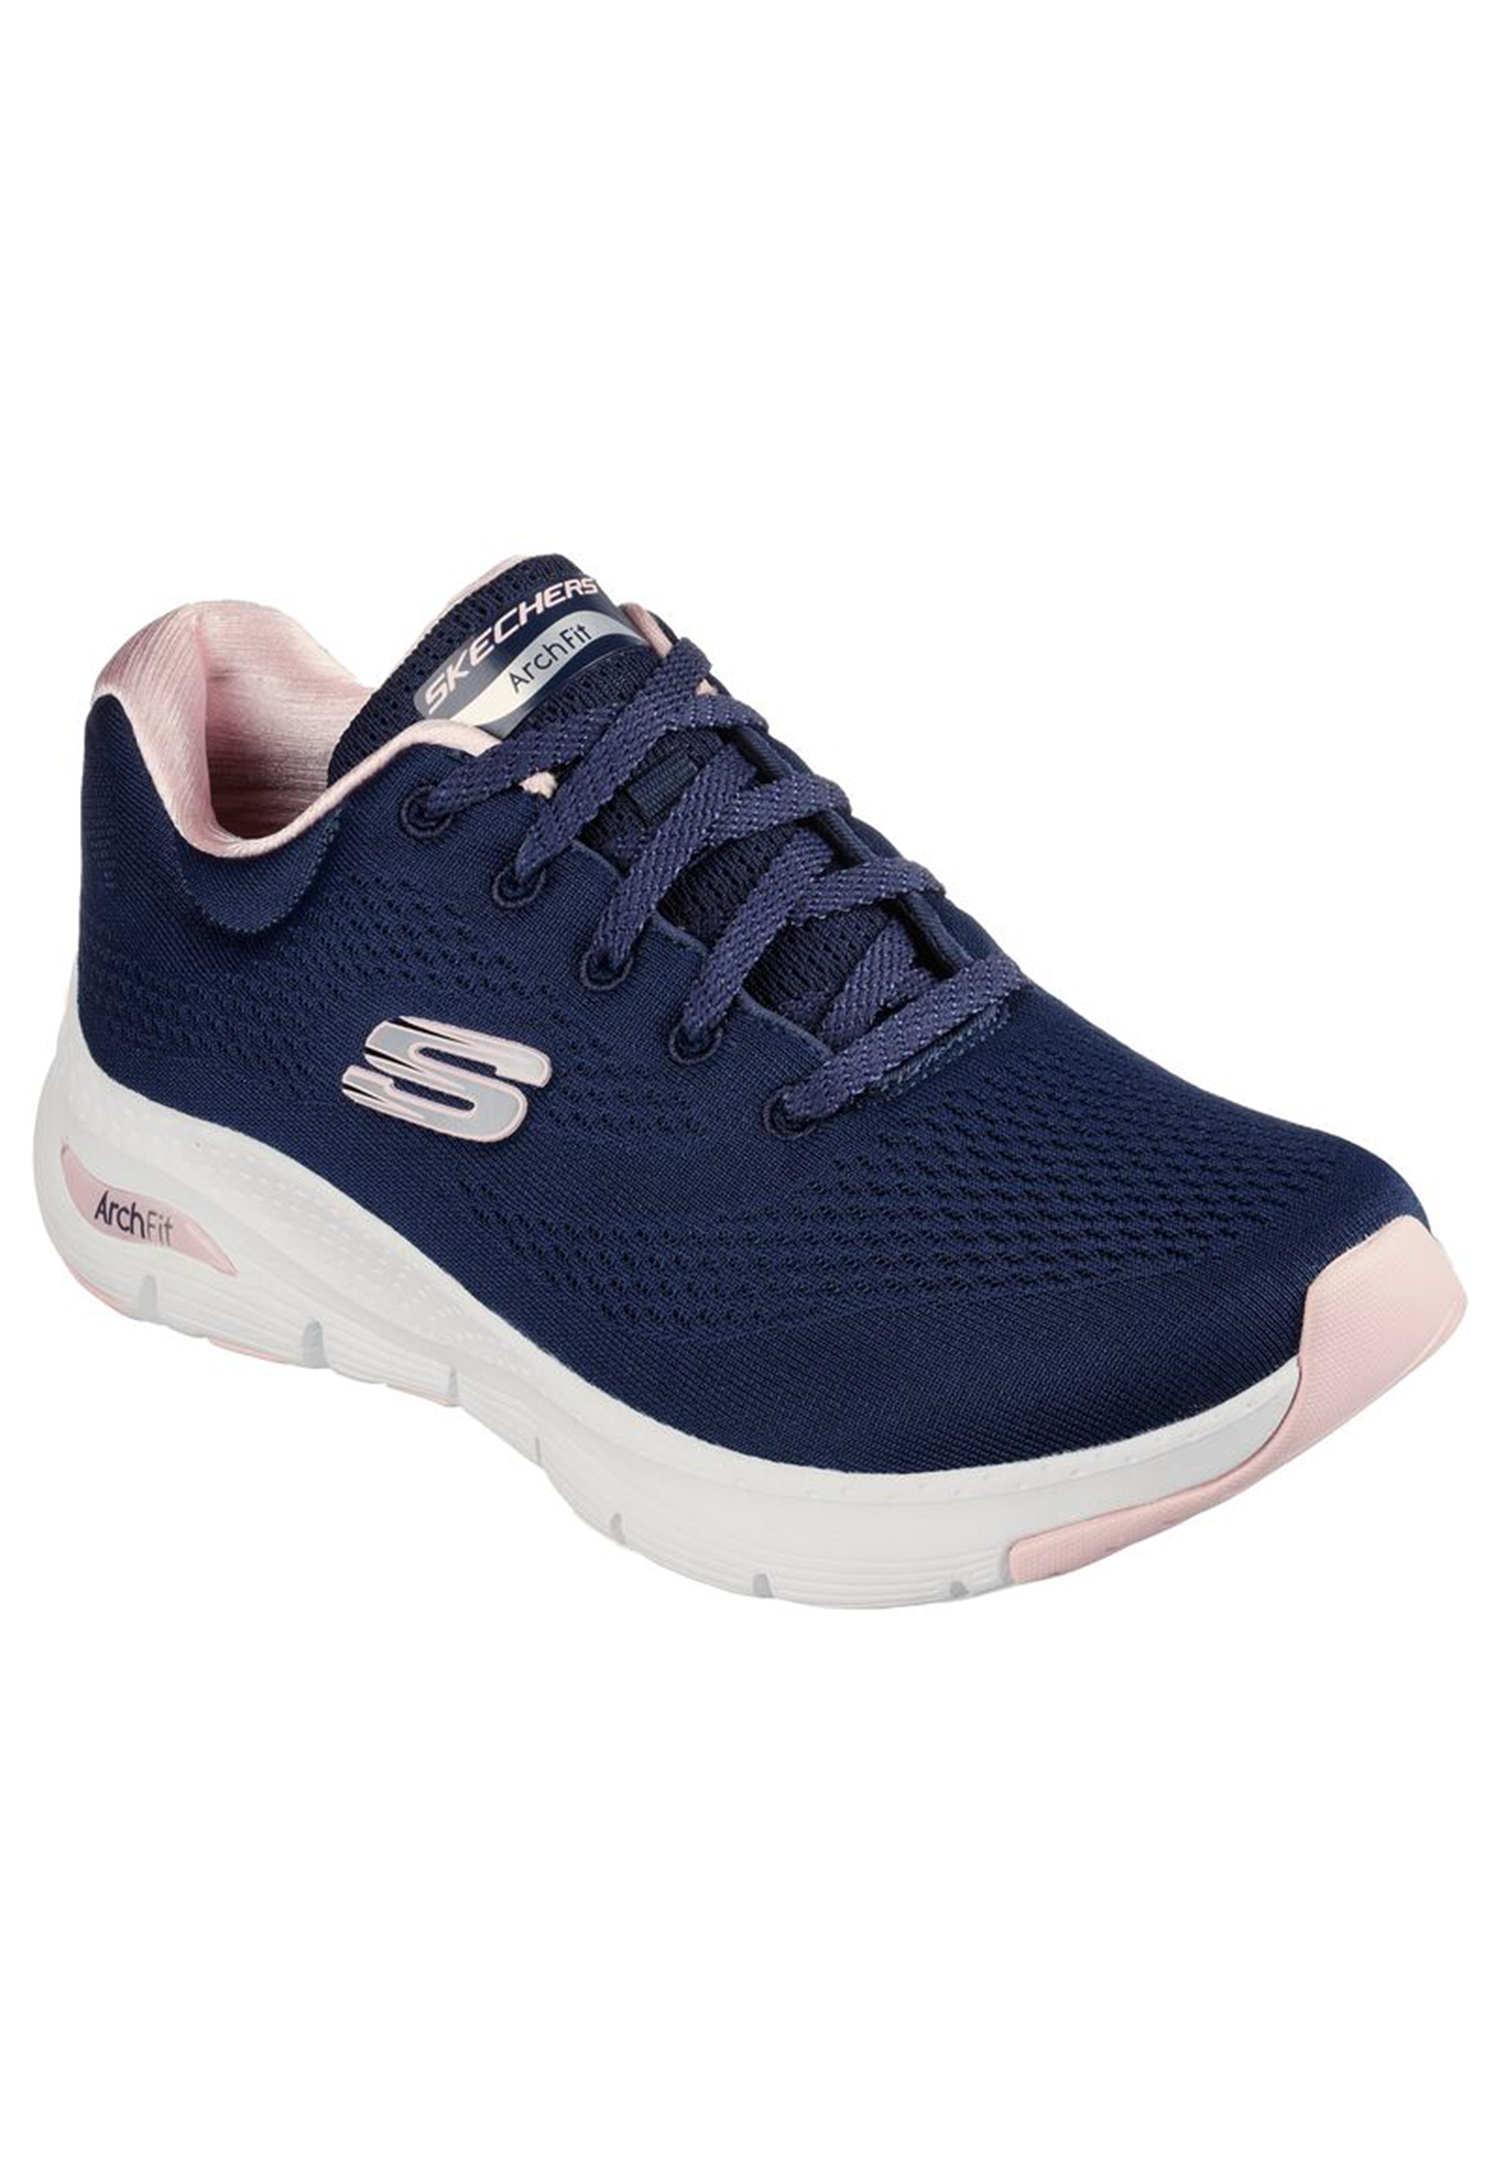 Кроссовки Skechers Low ARCH FIT BIG APPEAL, синий кроссовки skechers sport deportivo arch fit big appeal black